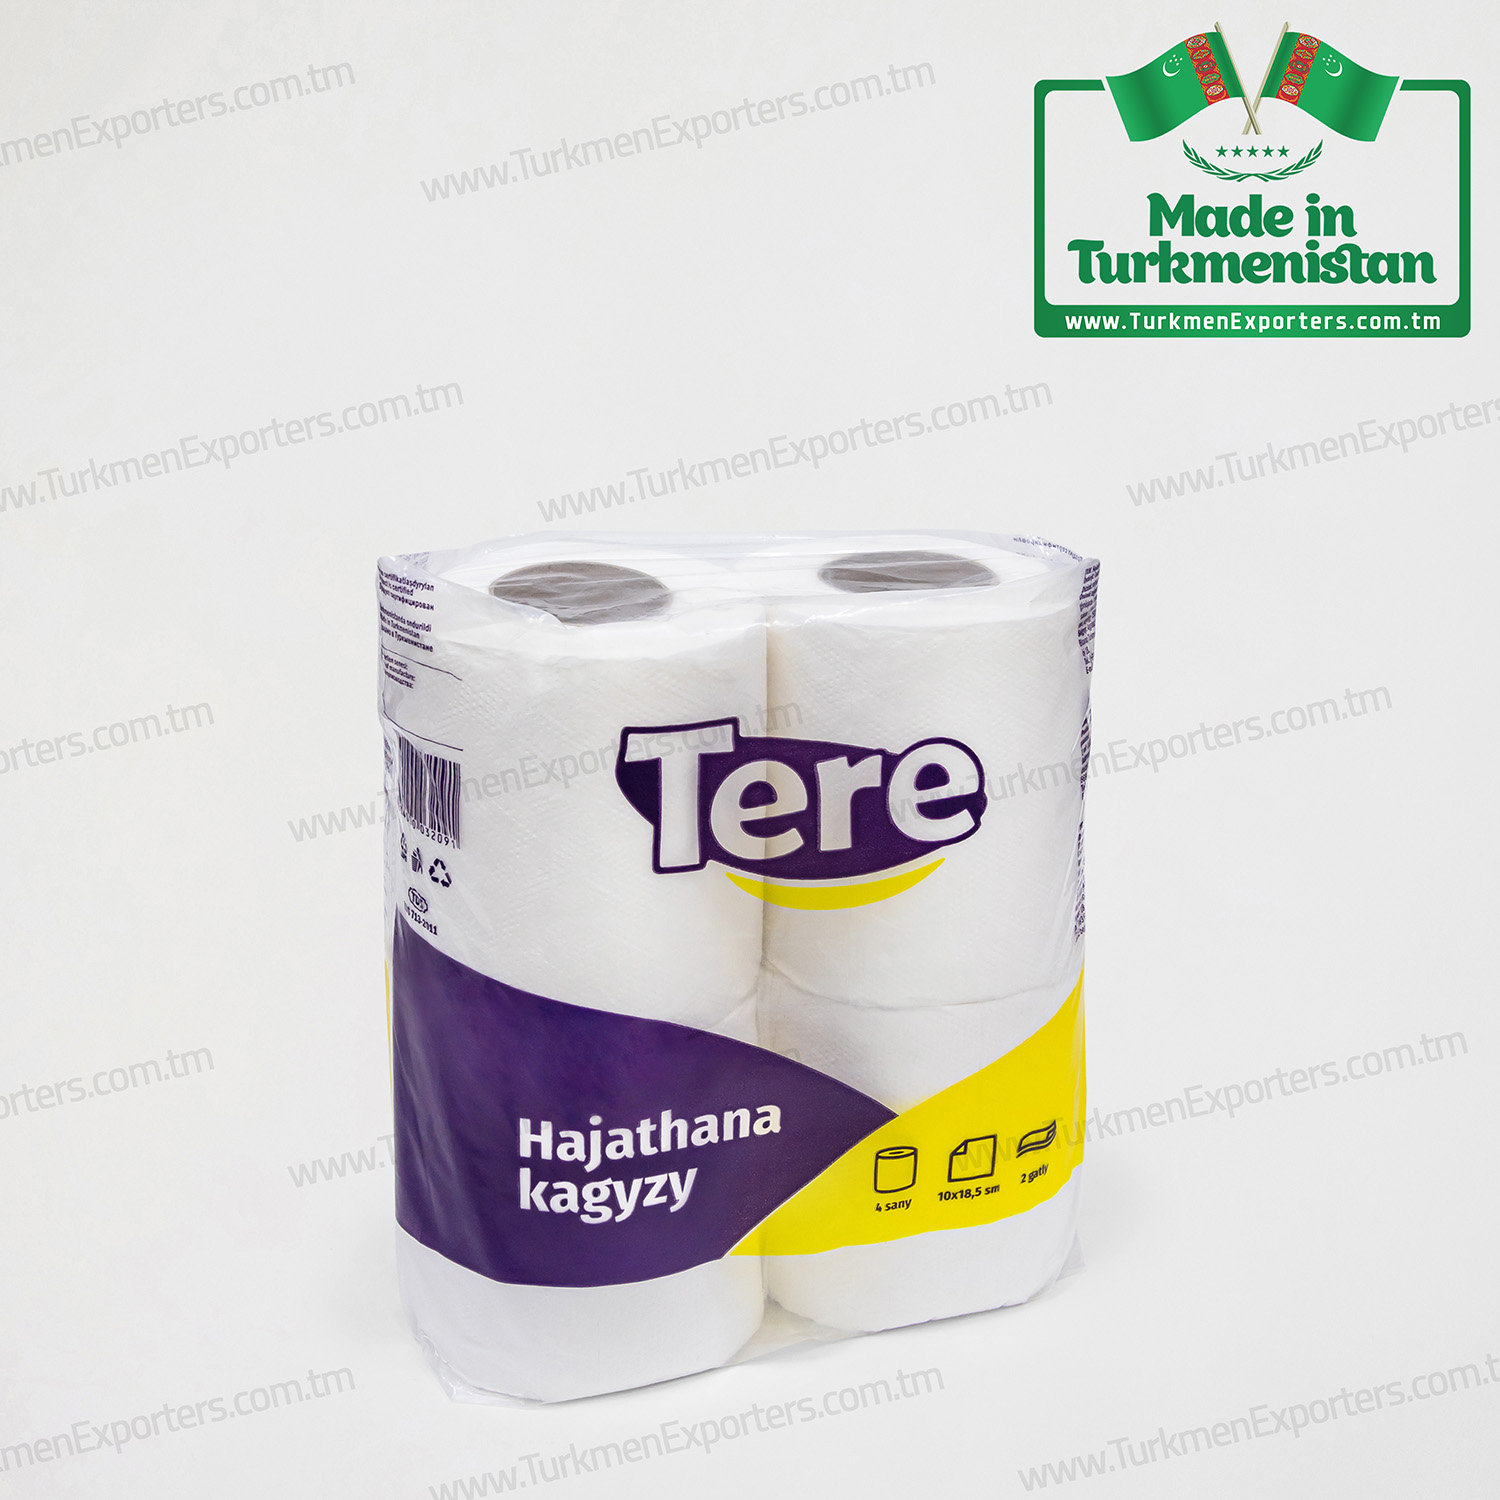 Toilet paper Made in Turkmenistan | Tere paper factory